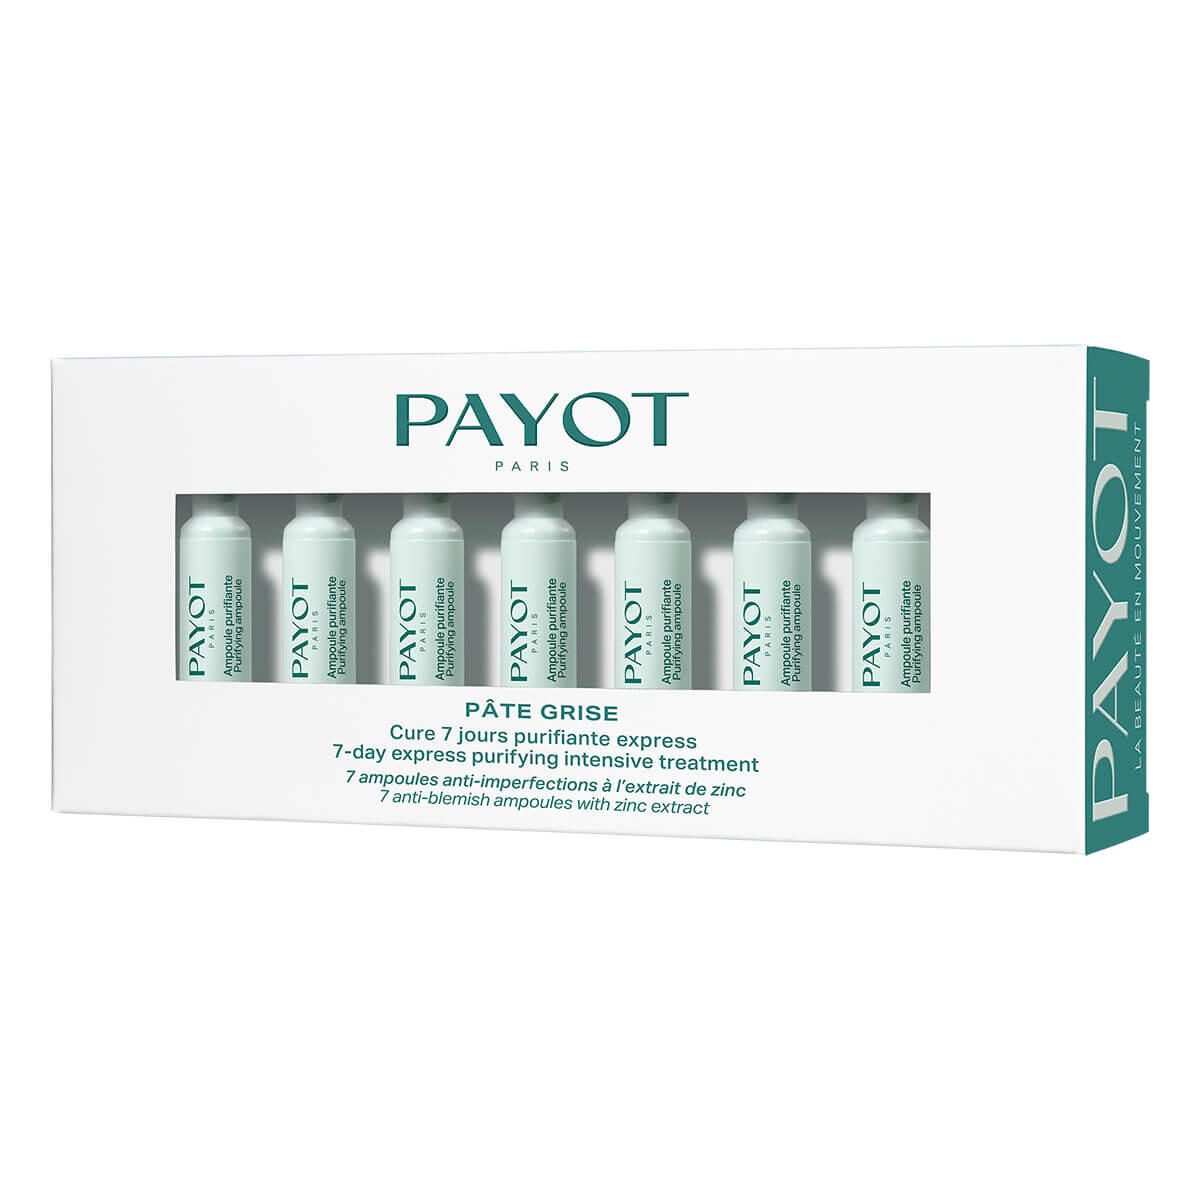 Billede af Payot PÃ¢te Grise 7-day Express Purifying Intensive Treatment kur, 7 x 1,5 ml.